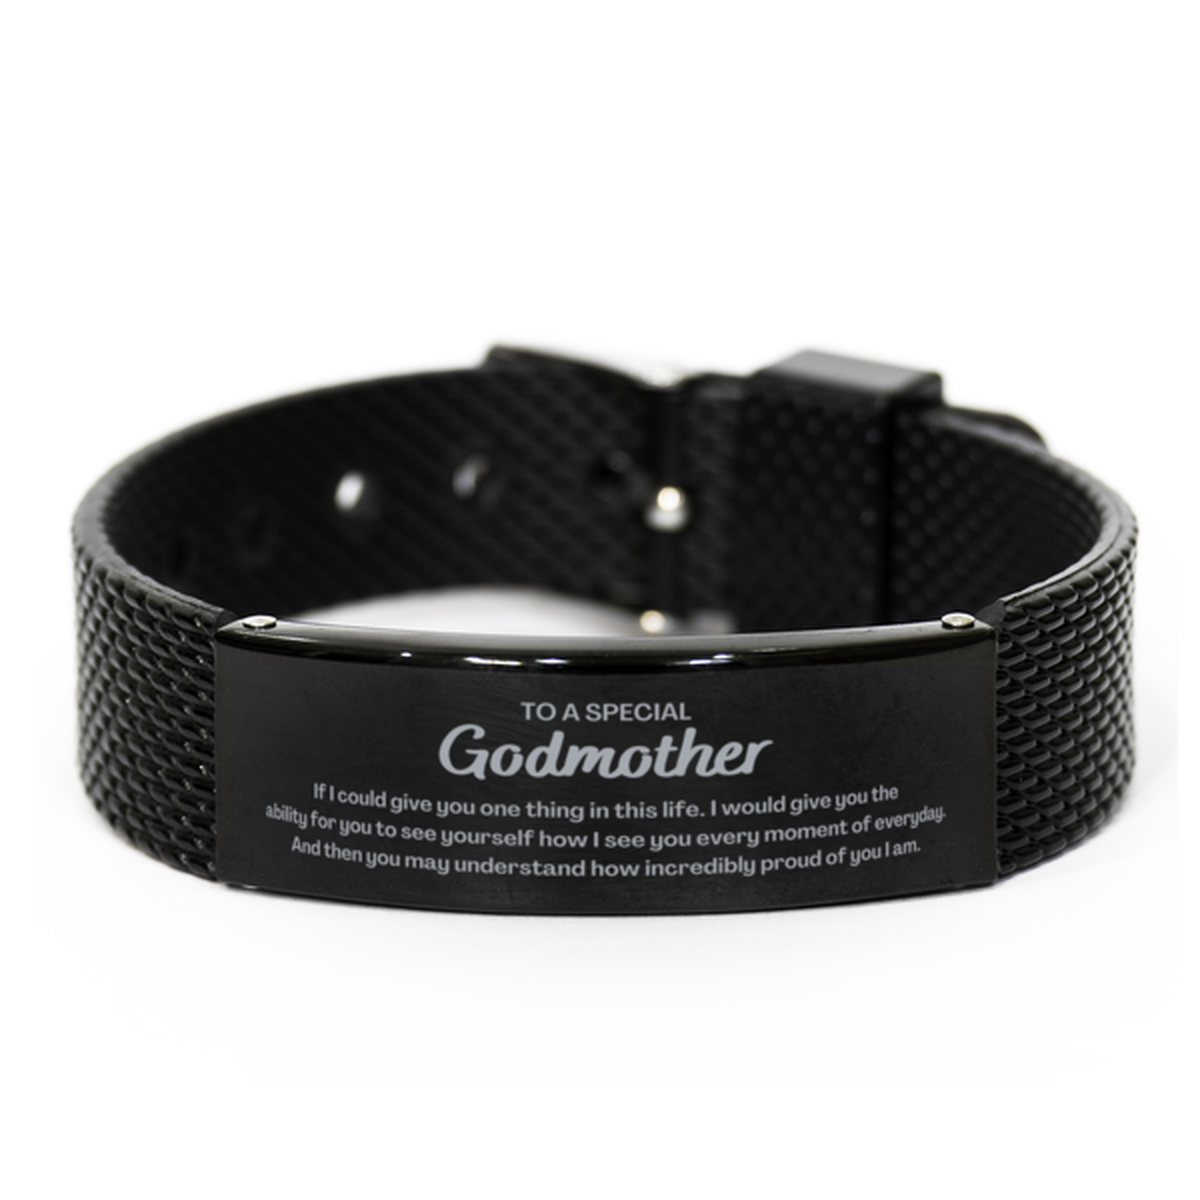 To My Godmother Black Shark Mesh Bracelet, Gifts For Godmother Engraved, Inspirational Gifts for Christmas Birthday, Epic Gifts for Godmother To A Special Godmother how incredibly proud of you I am